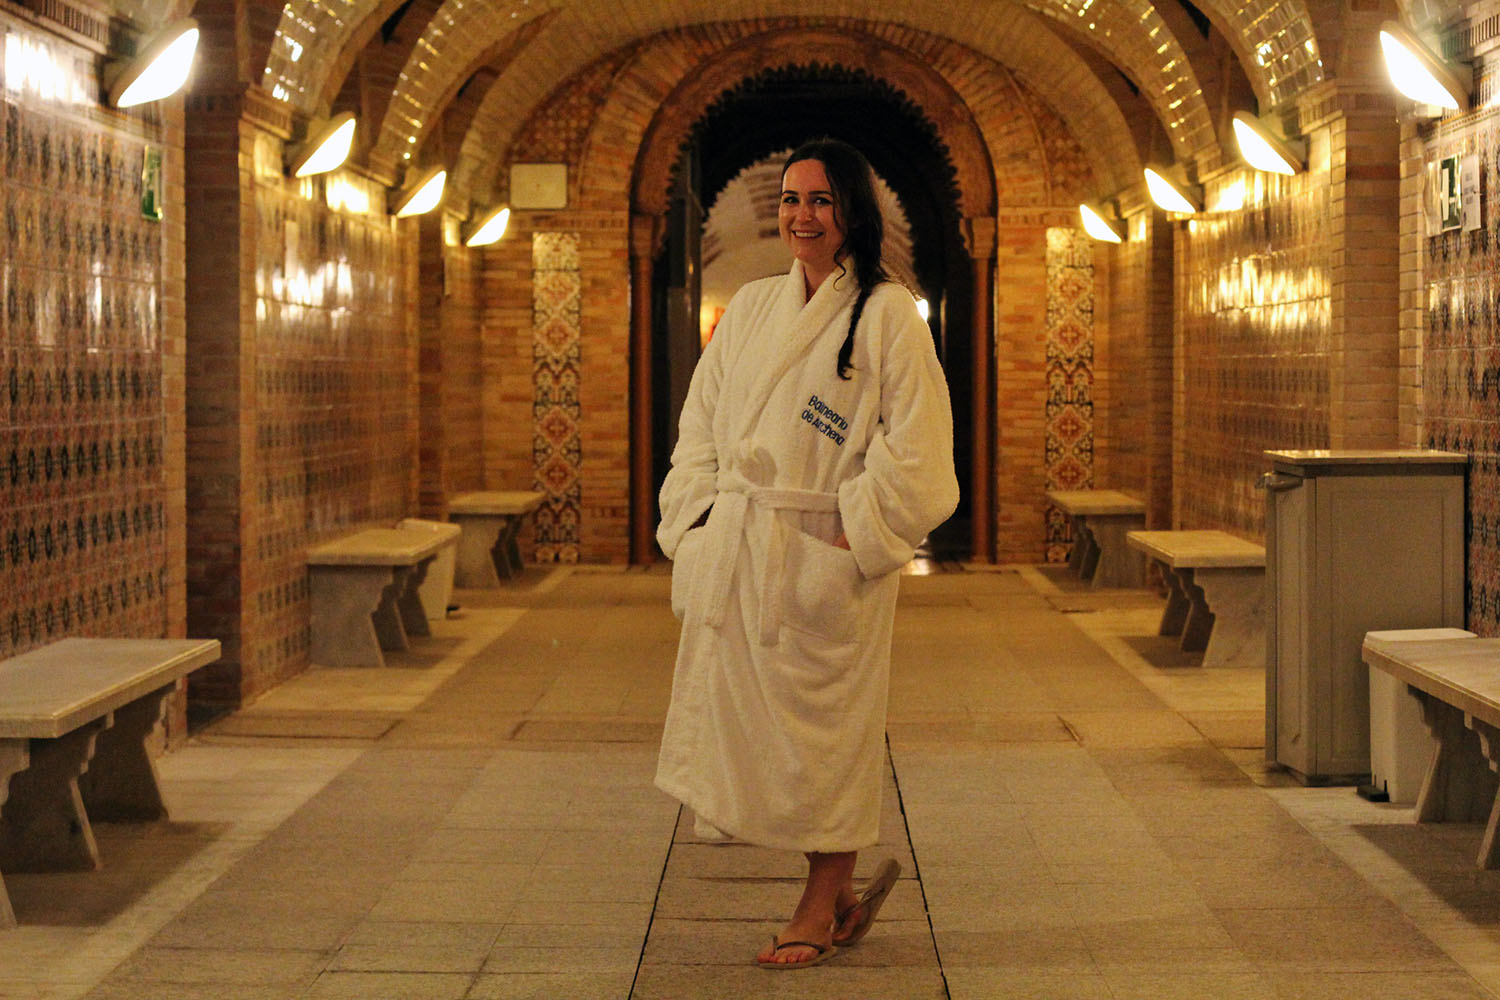 woman in spa robe stands in the underground arched hallway of the spa